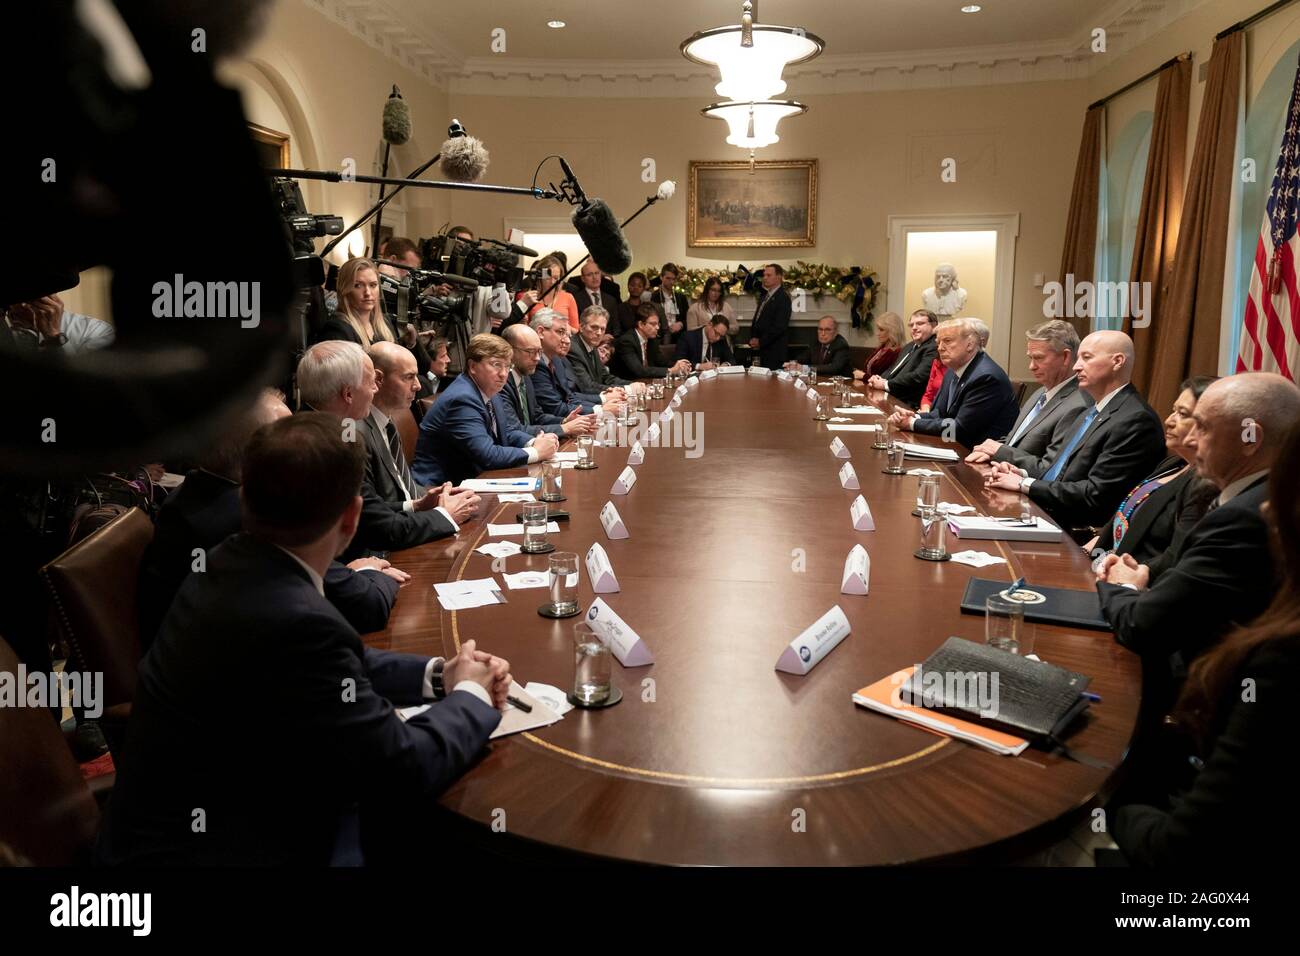 Washington, United States of America. 16 December, 2019. U.S President Donald Trump and Vice President Mike Pence host a roundtable on on the Governors Initiative on Regulatory Innovation in the Cabinet Room of the White House December 16, 2019 in Washington, DC.  Credit: Tia Dufour/White House Photo/Alamy Live News Stock Photo